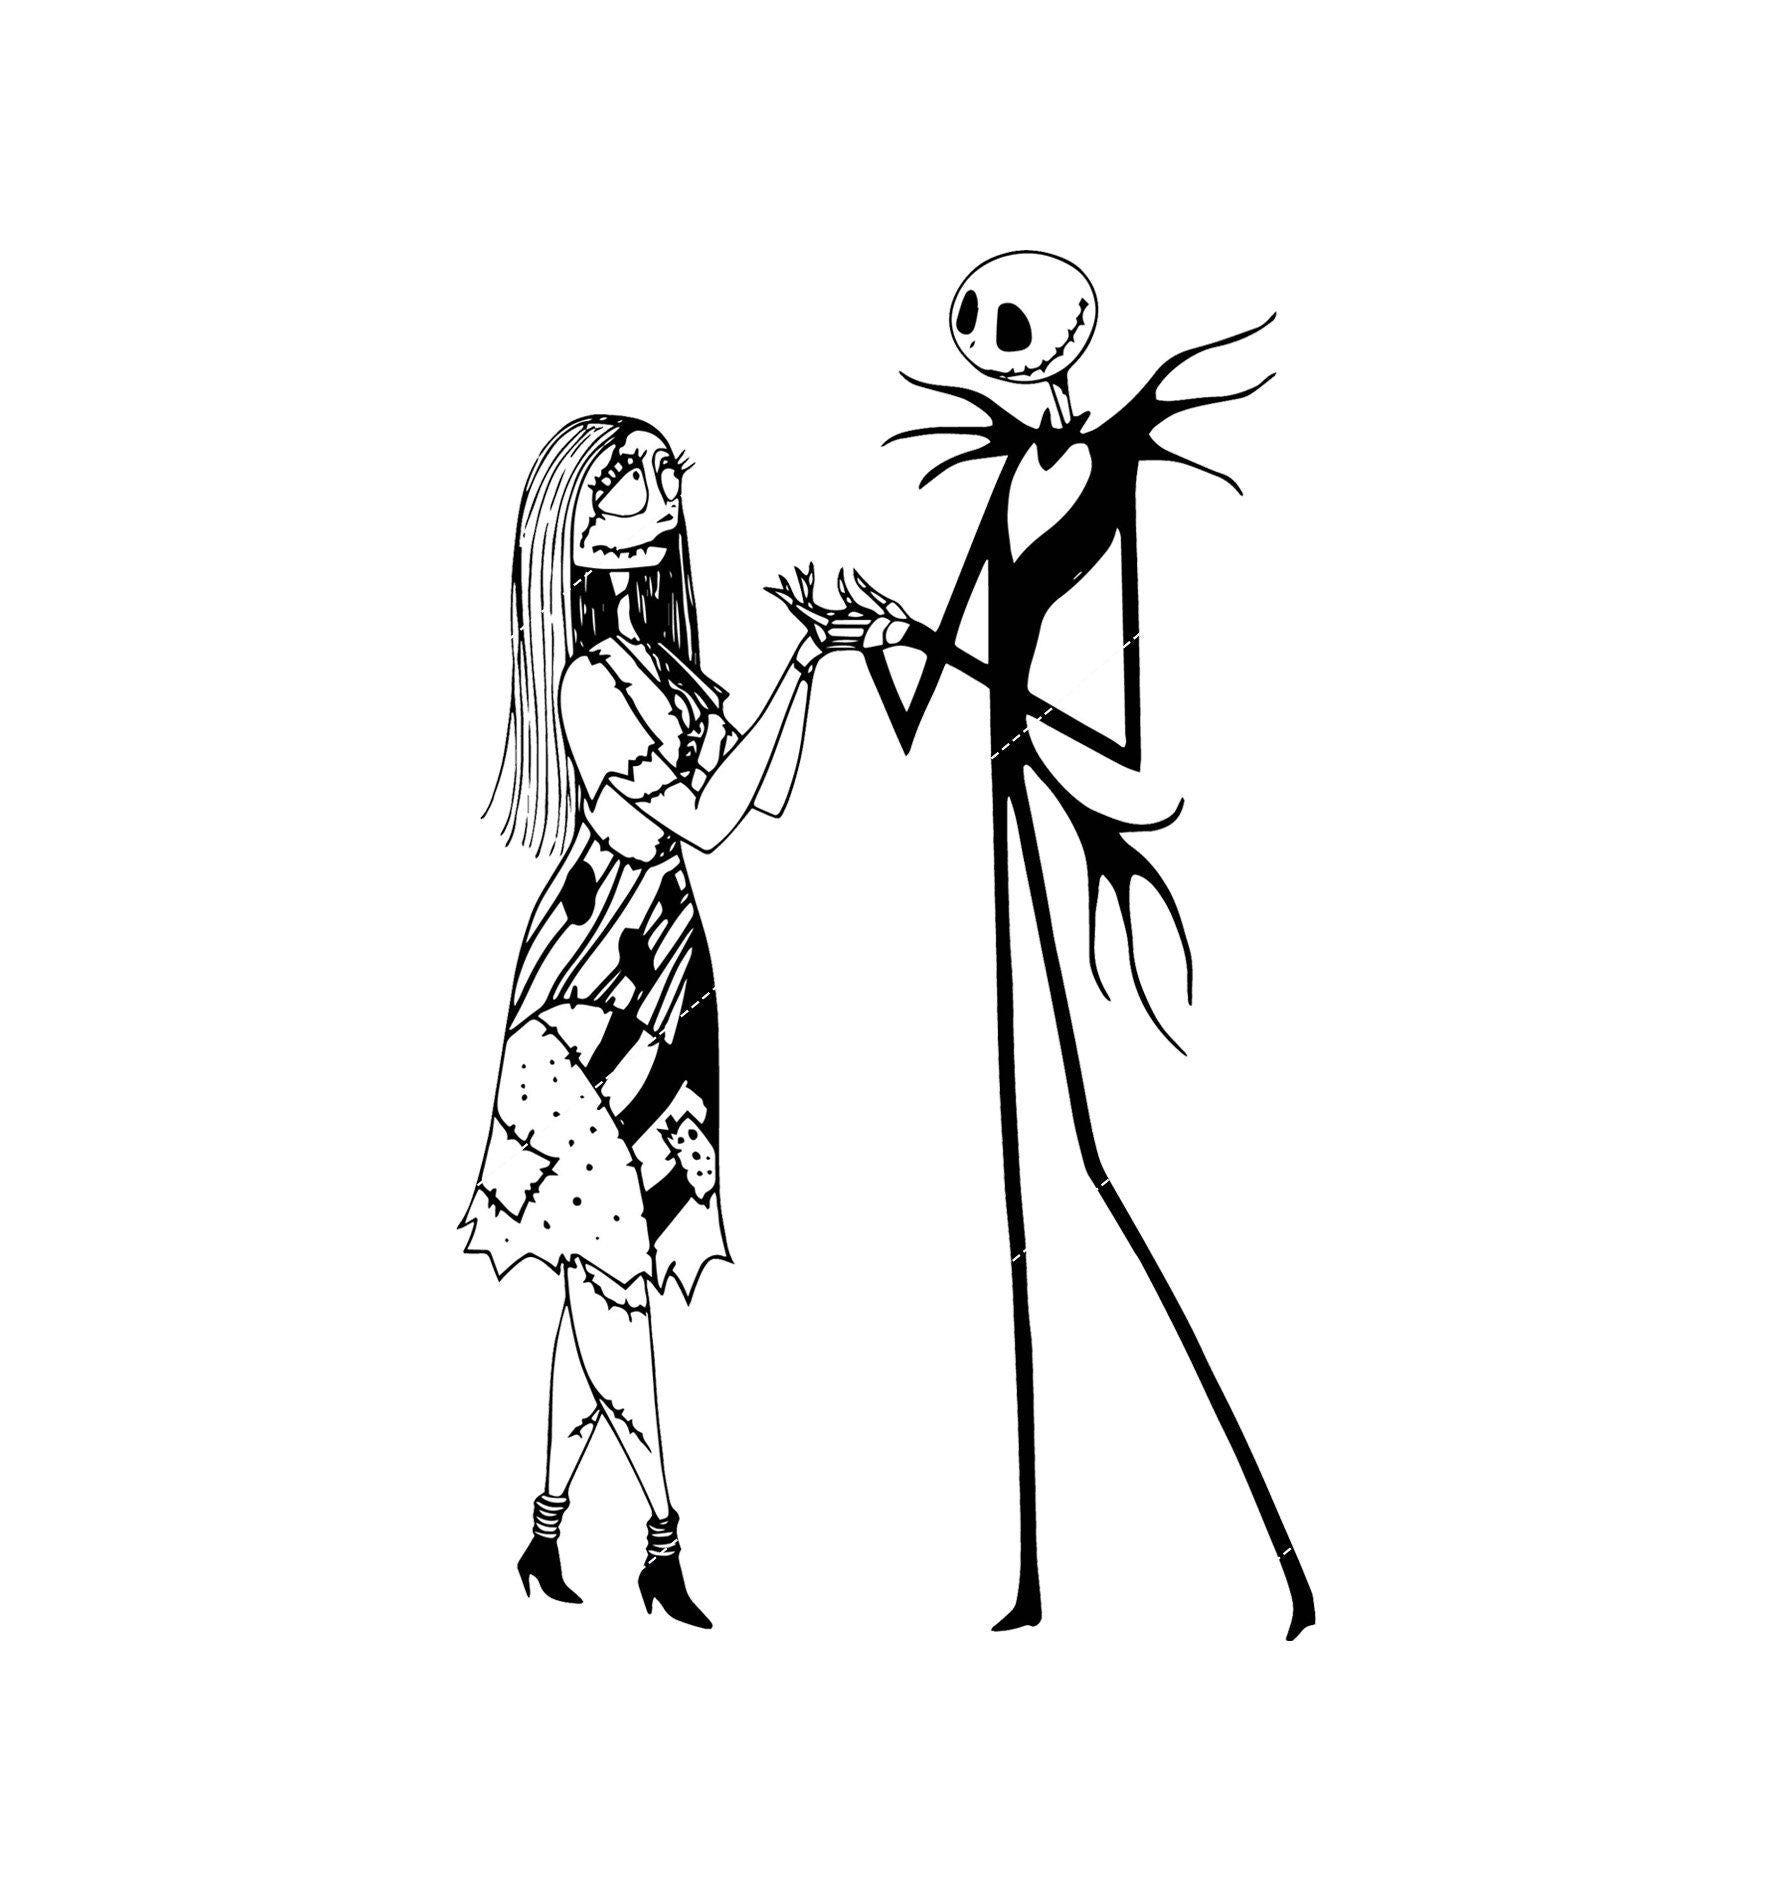 Jack And Sally In Heart SVG, Couple Jack And Sally SVG, The Nightmare Before SVG, Halloween Svg